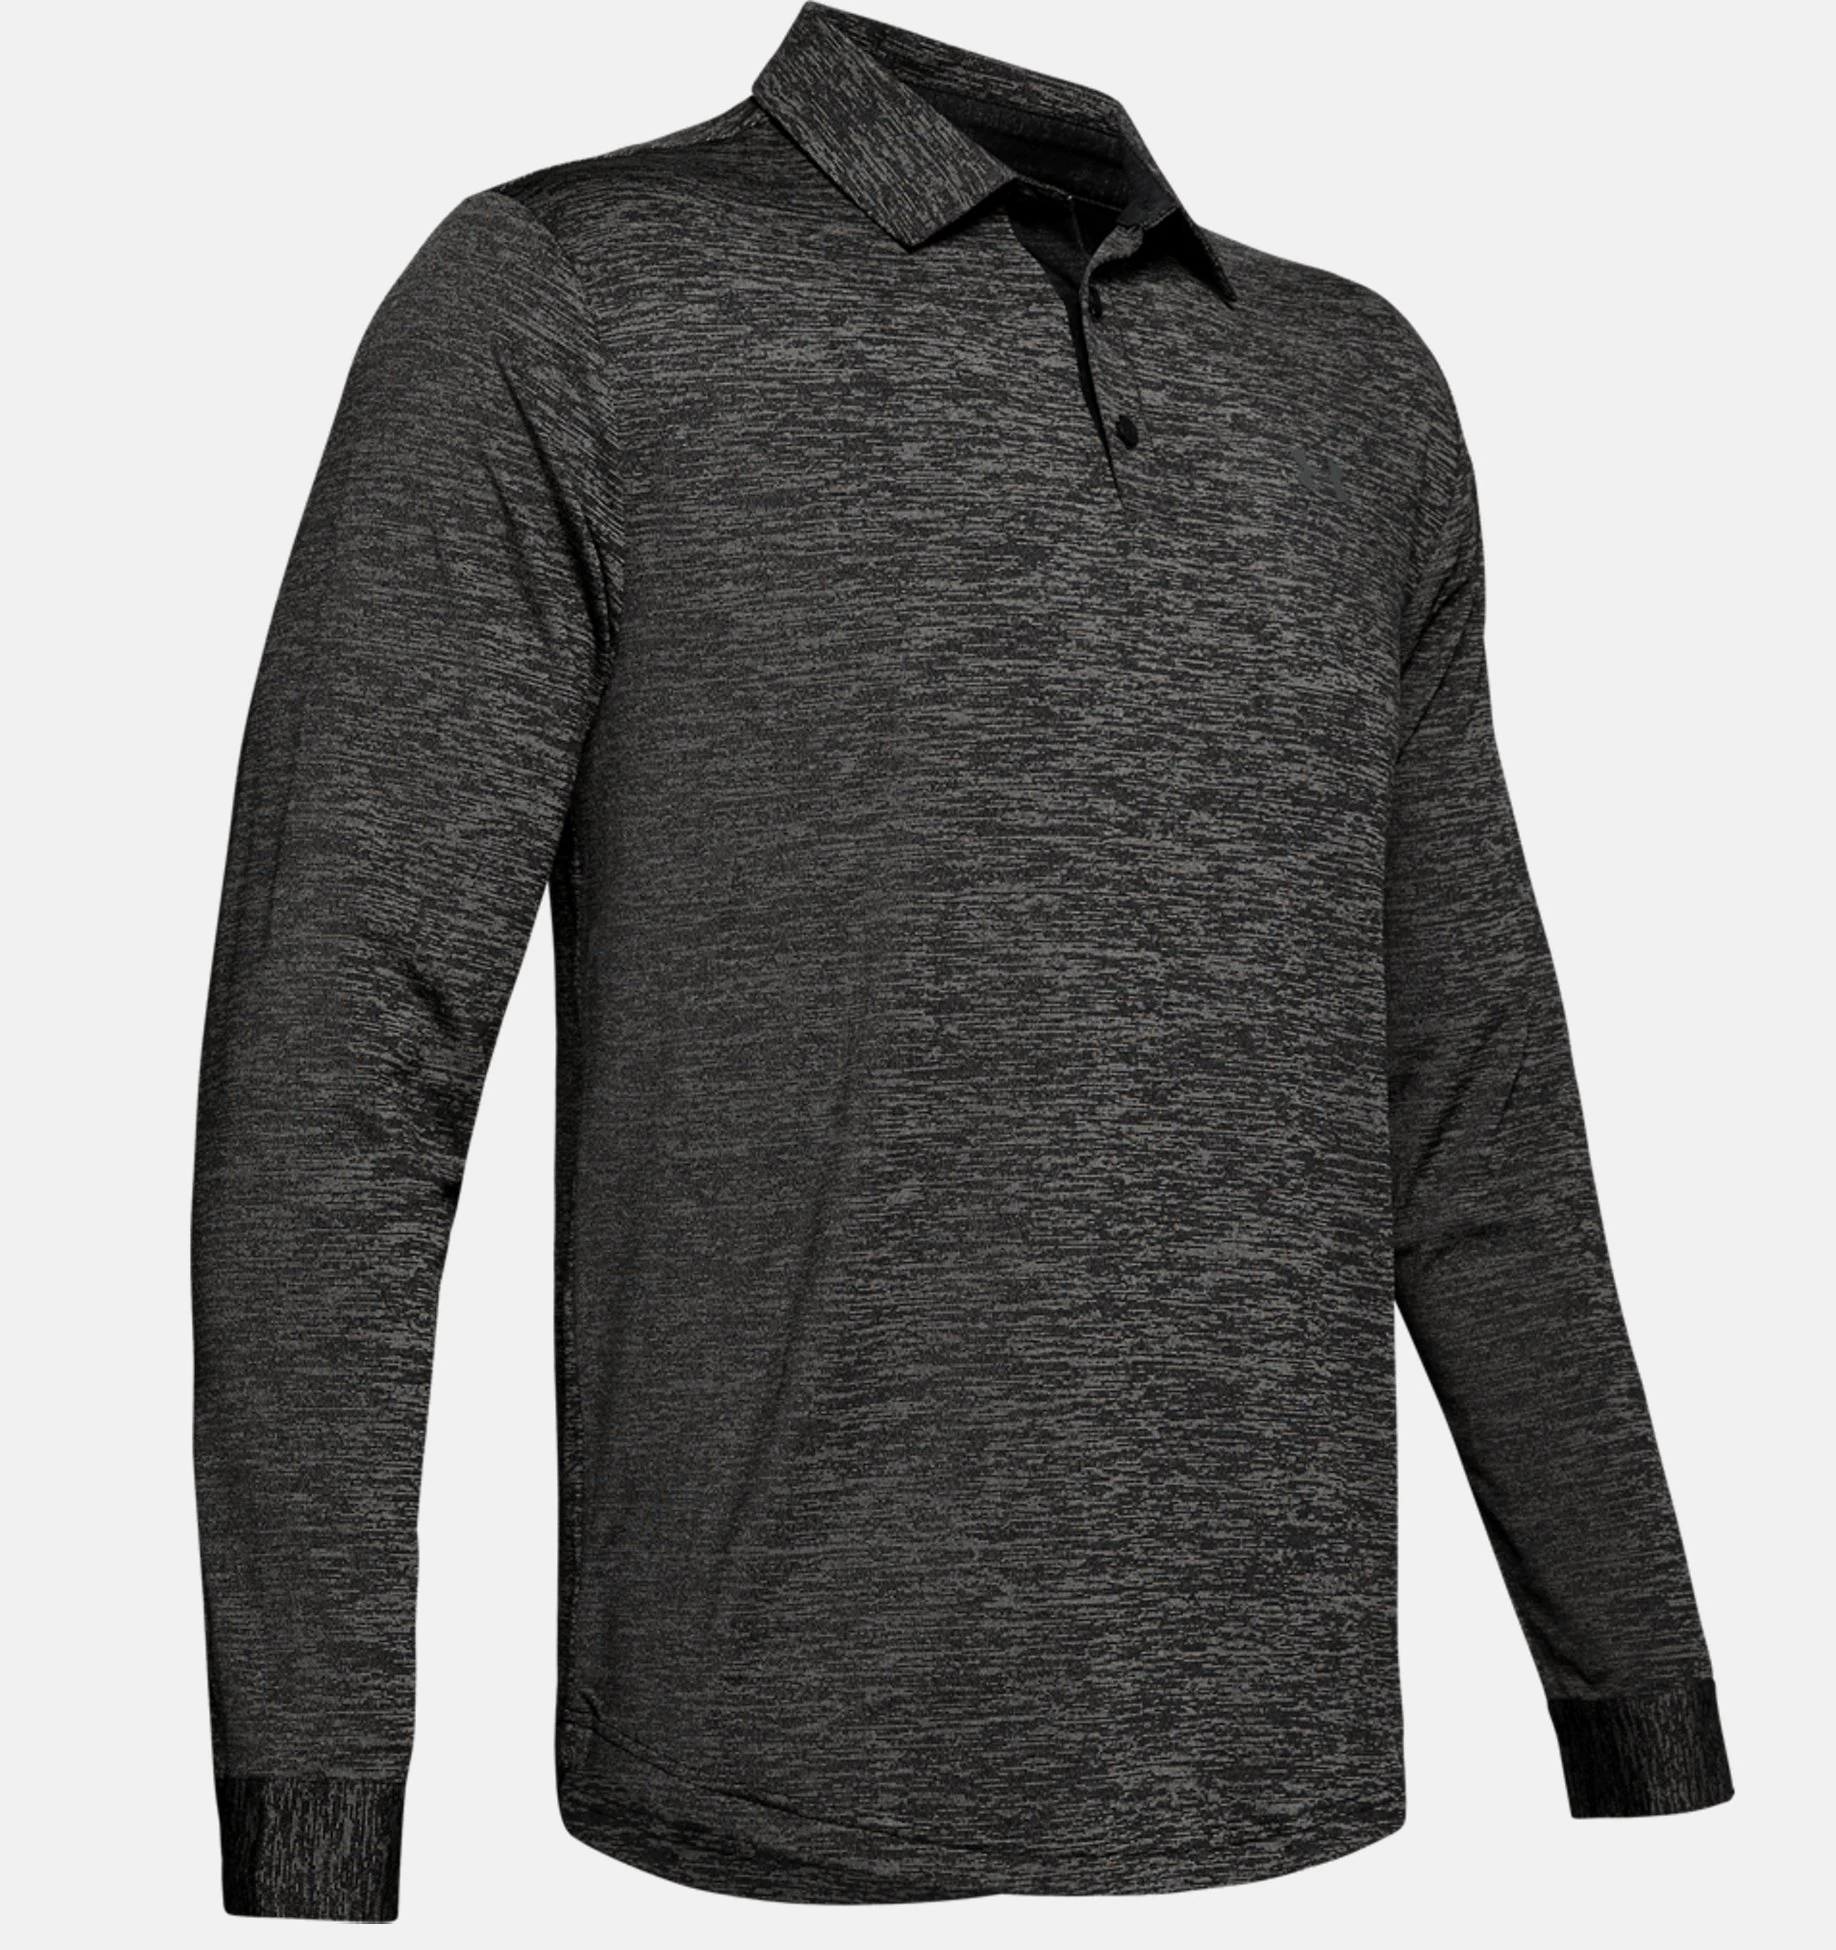 Under Armour Playoff 2.0 Long Sleeve Polo shirt in Black #1345463 category image